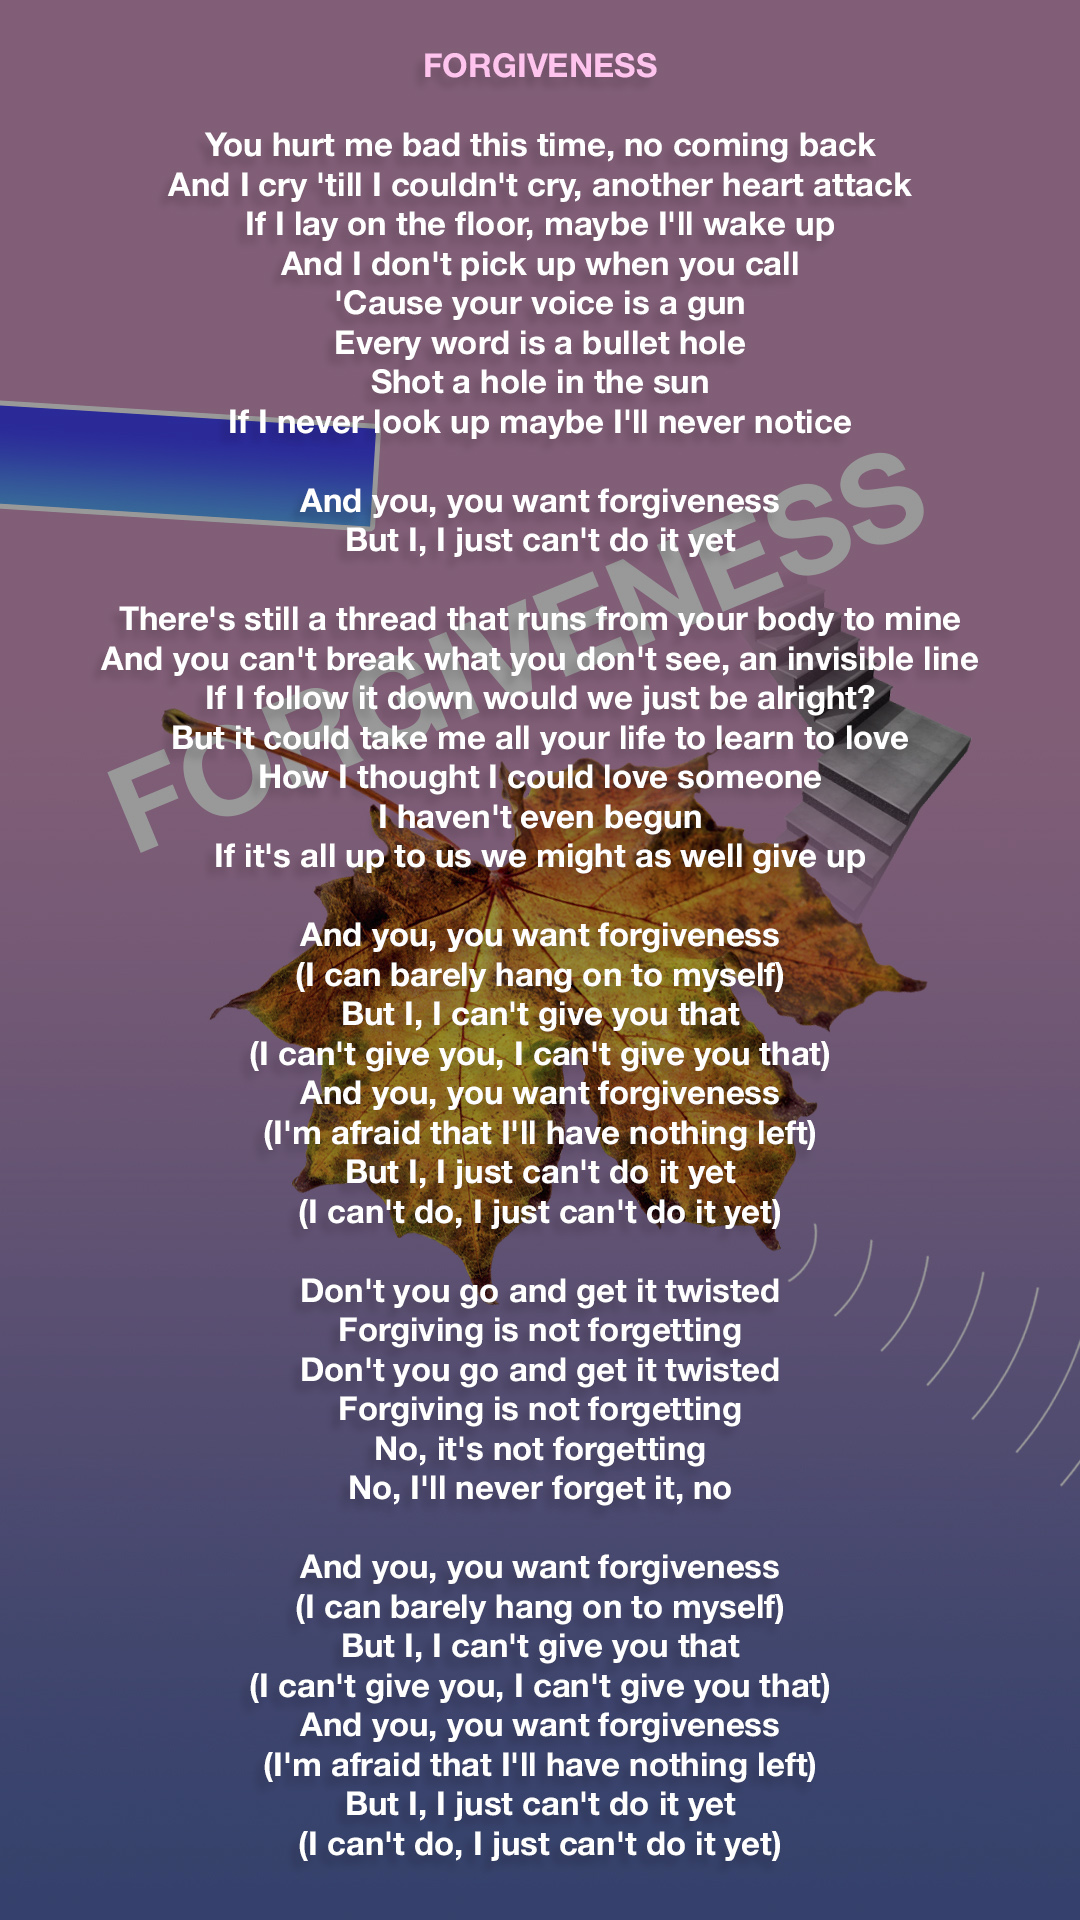 FORGIVENESS - Paramore - After Laughter LYRICS by alanrius on DeviantArt